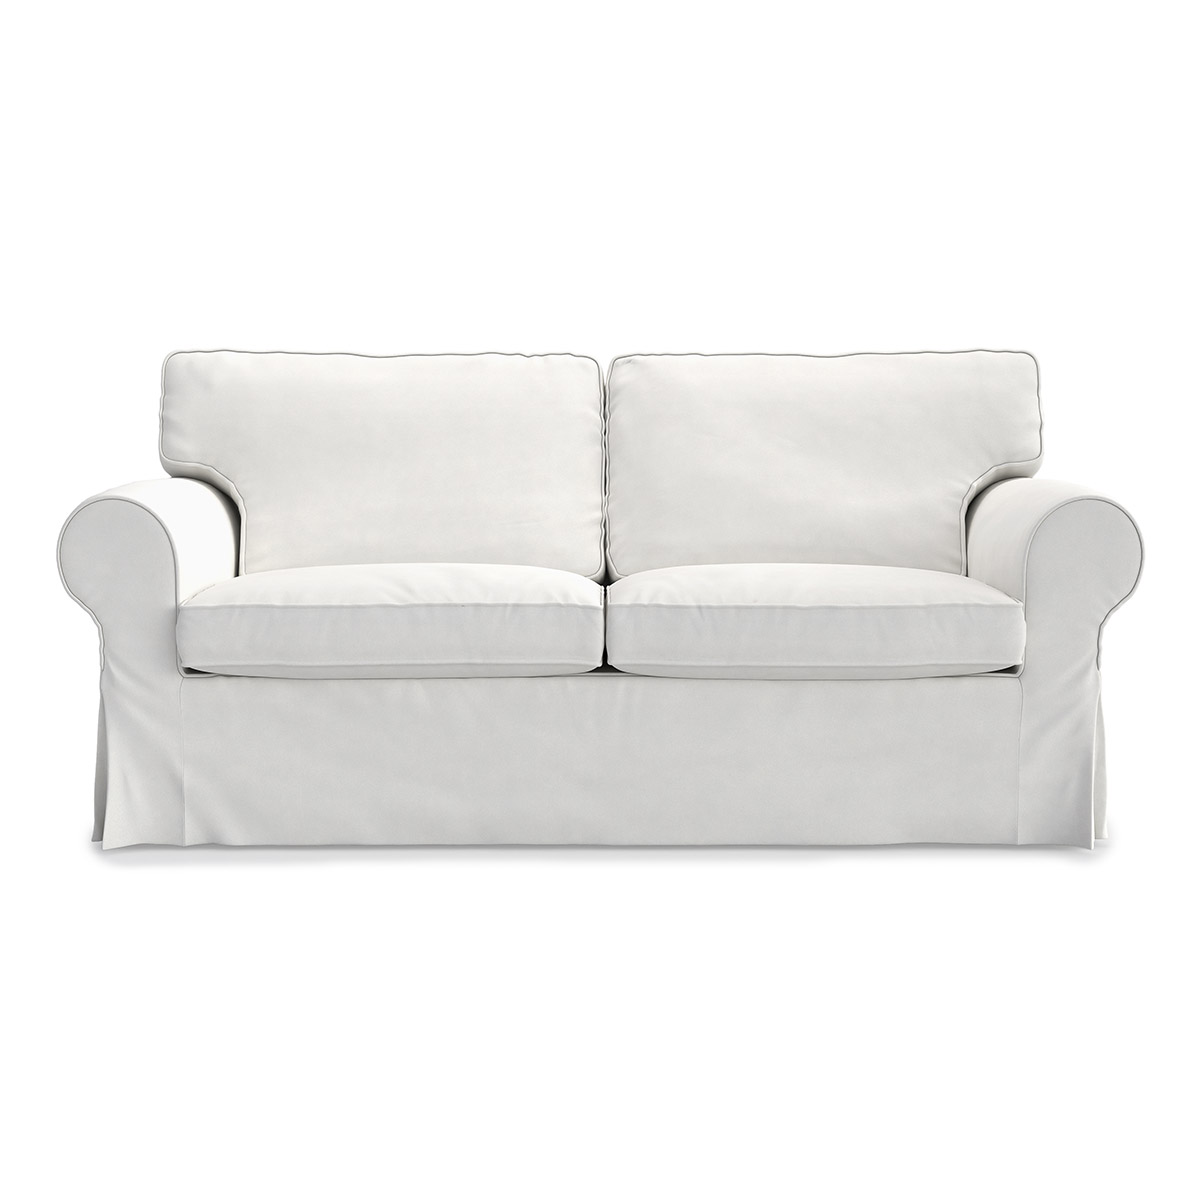 doden gras Blijven Ektorp 2 Seater Sofa Cover - Masters of Covers